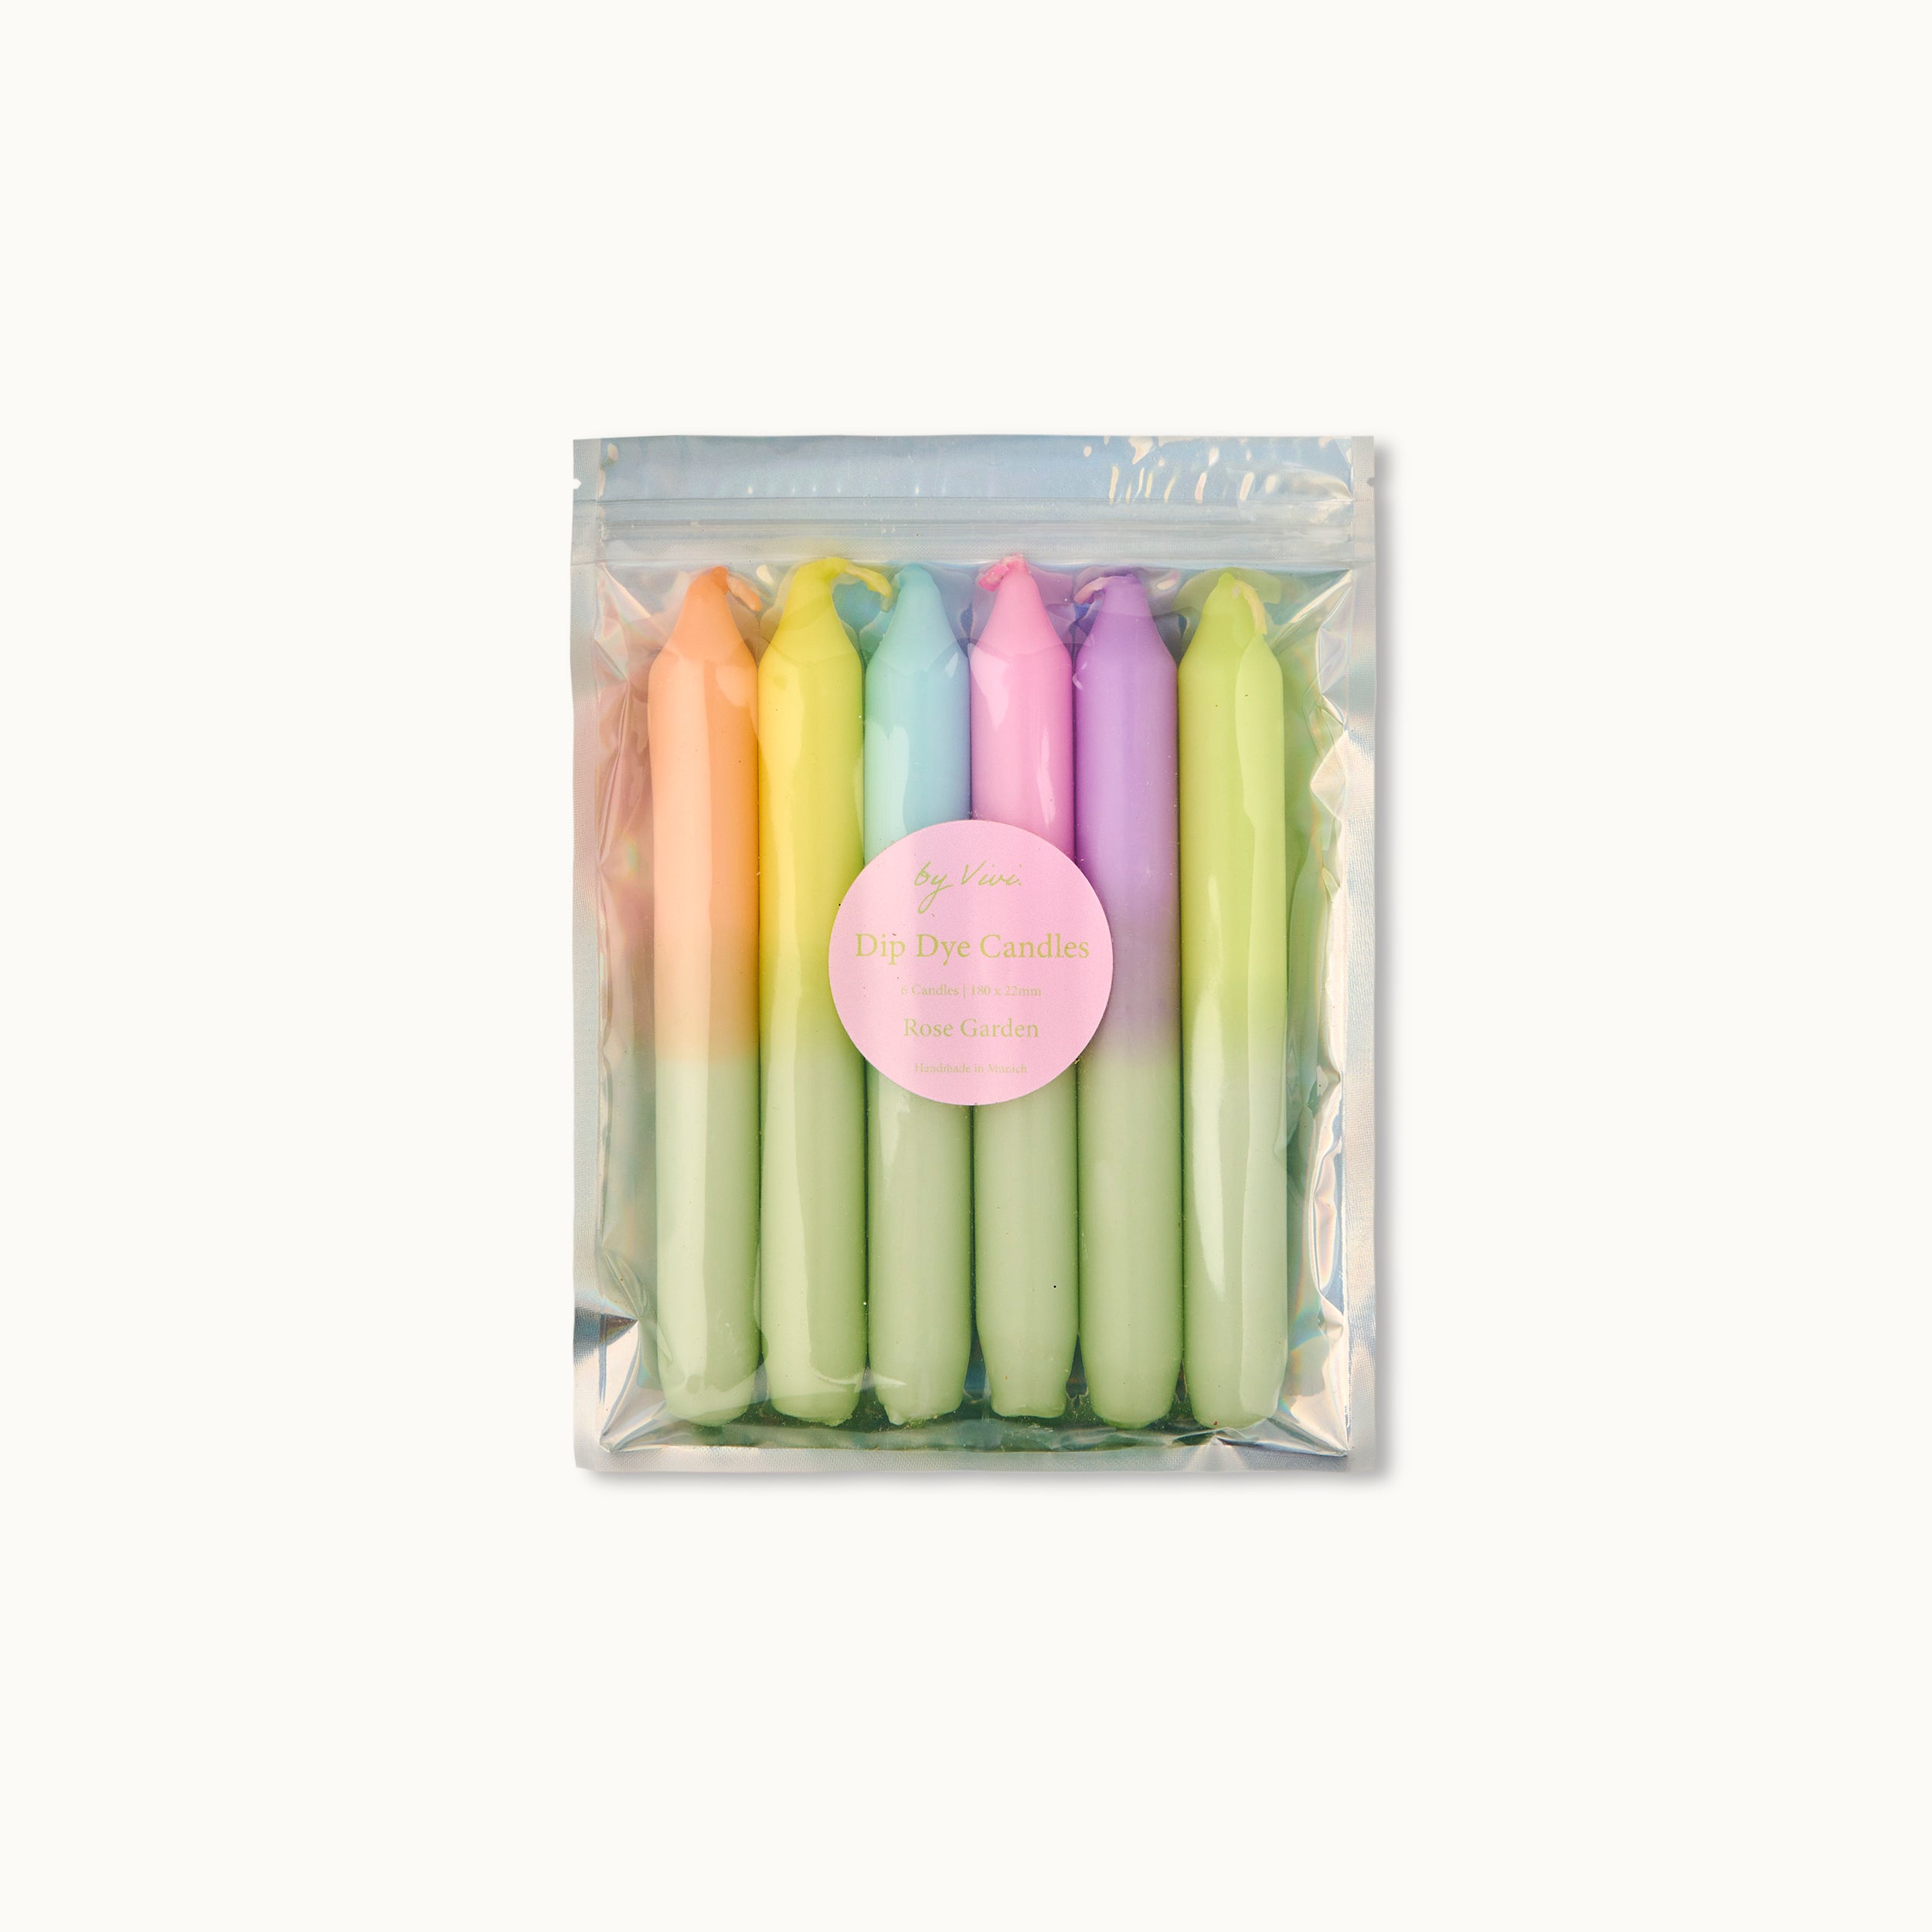 Dip Dye Candle Set: Pastell Edition